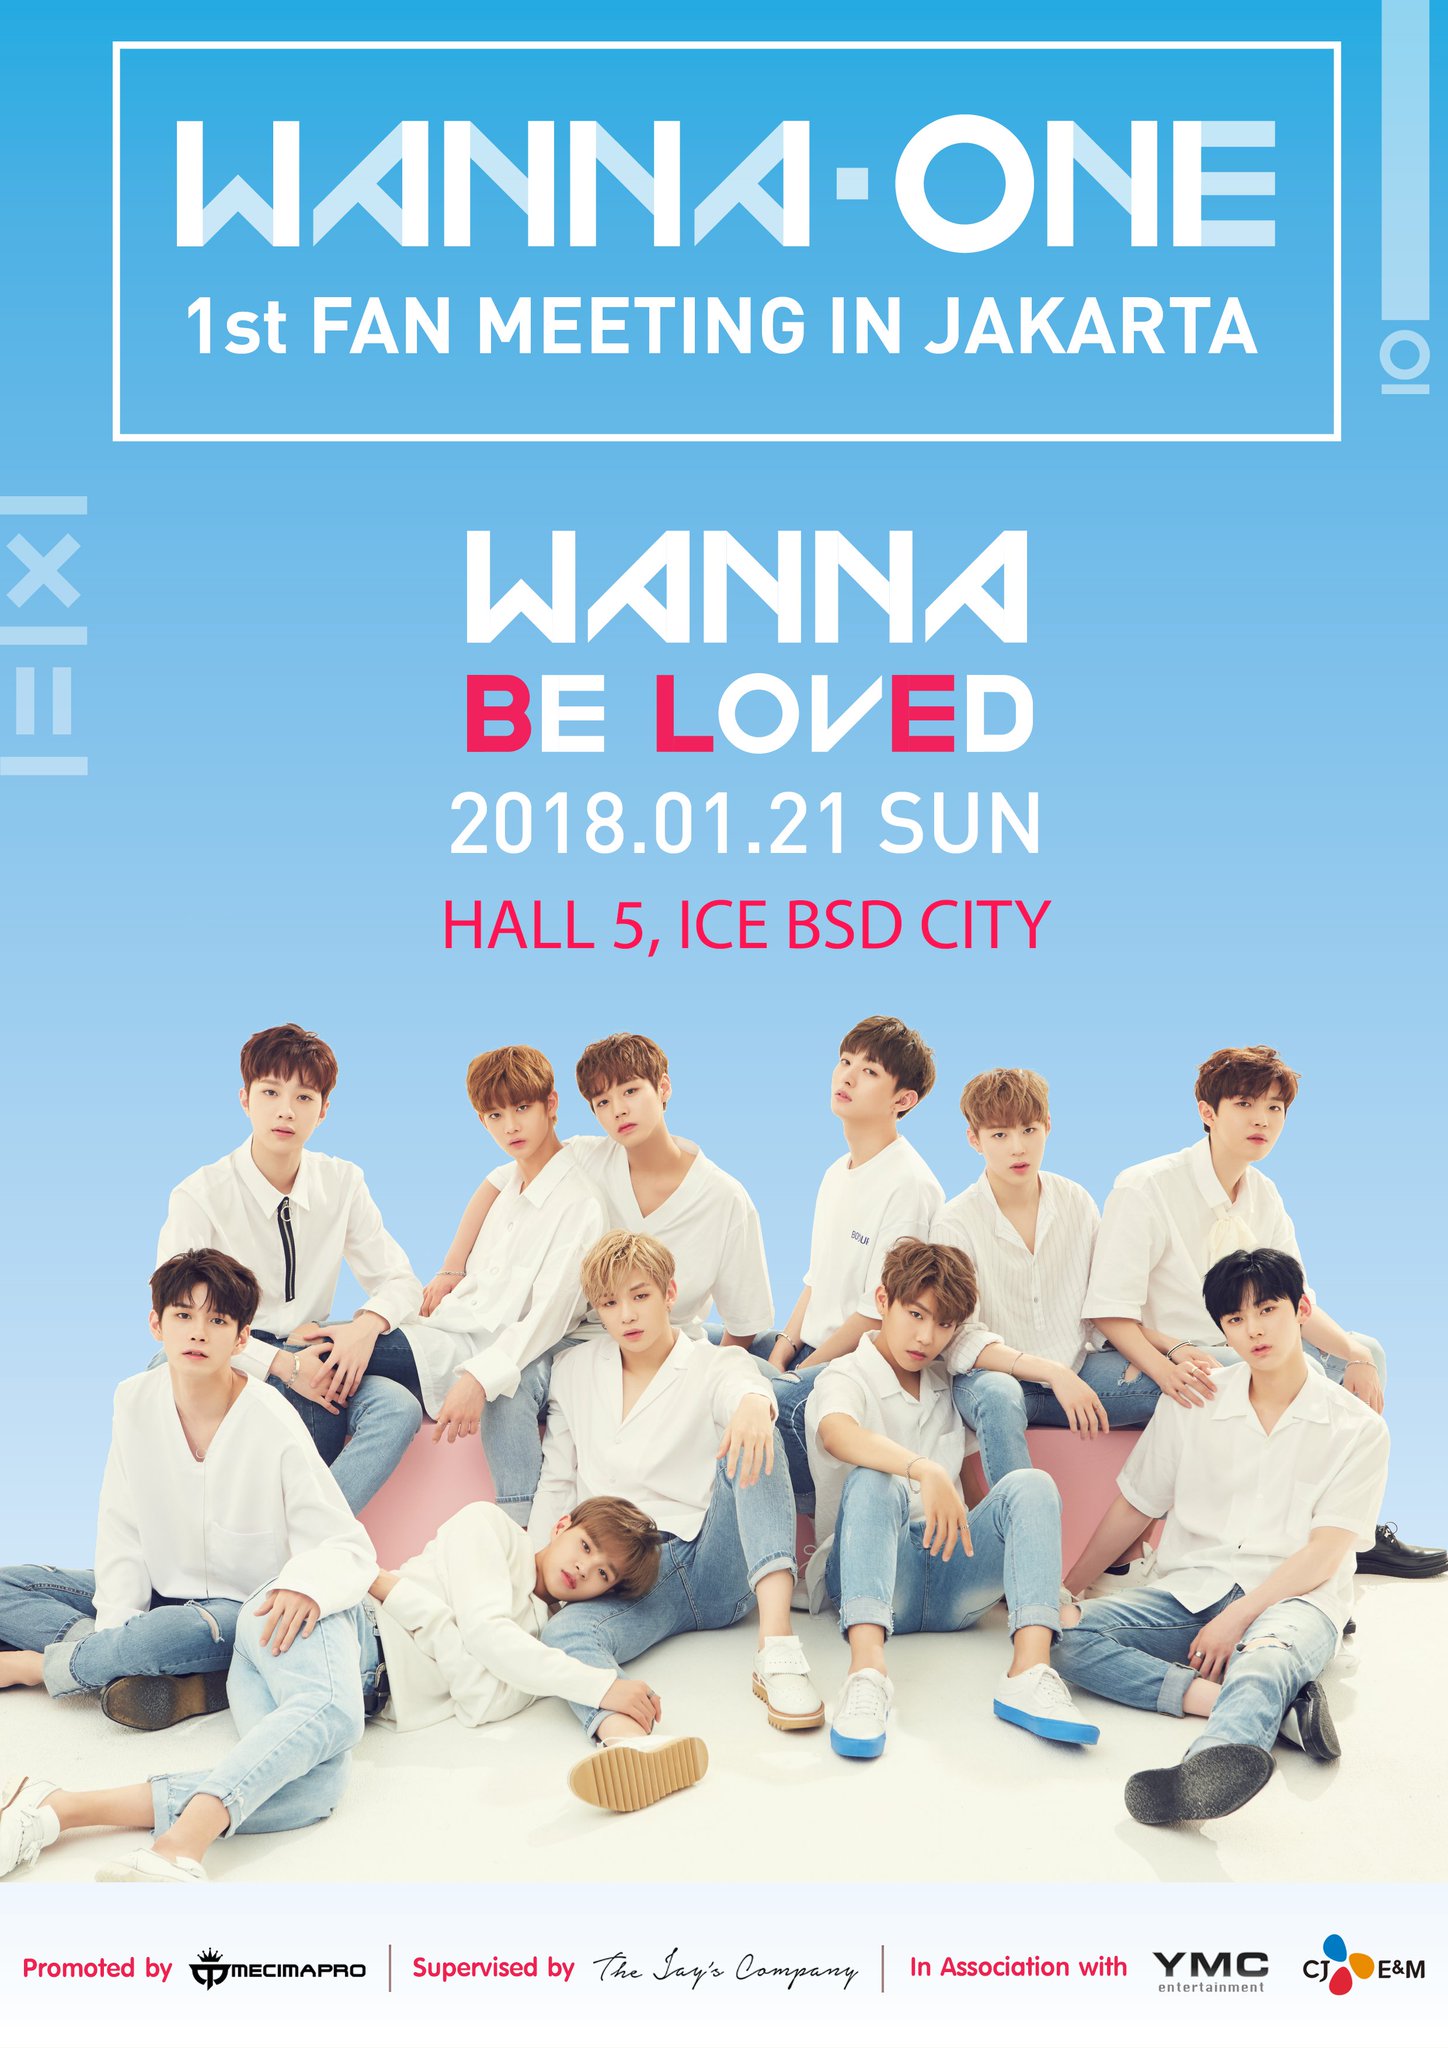 MCP sur Twitter "[ANNOUNCEMENT] WANNA ONE 1st FAN MEETING IN JAKARTA "WANNA BE LOVED" on Sunday 21st January 2018 at 7PM ICE HALL 5